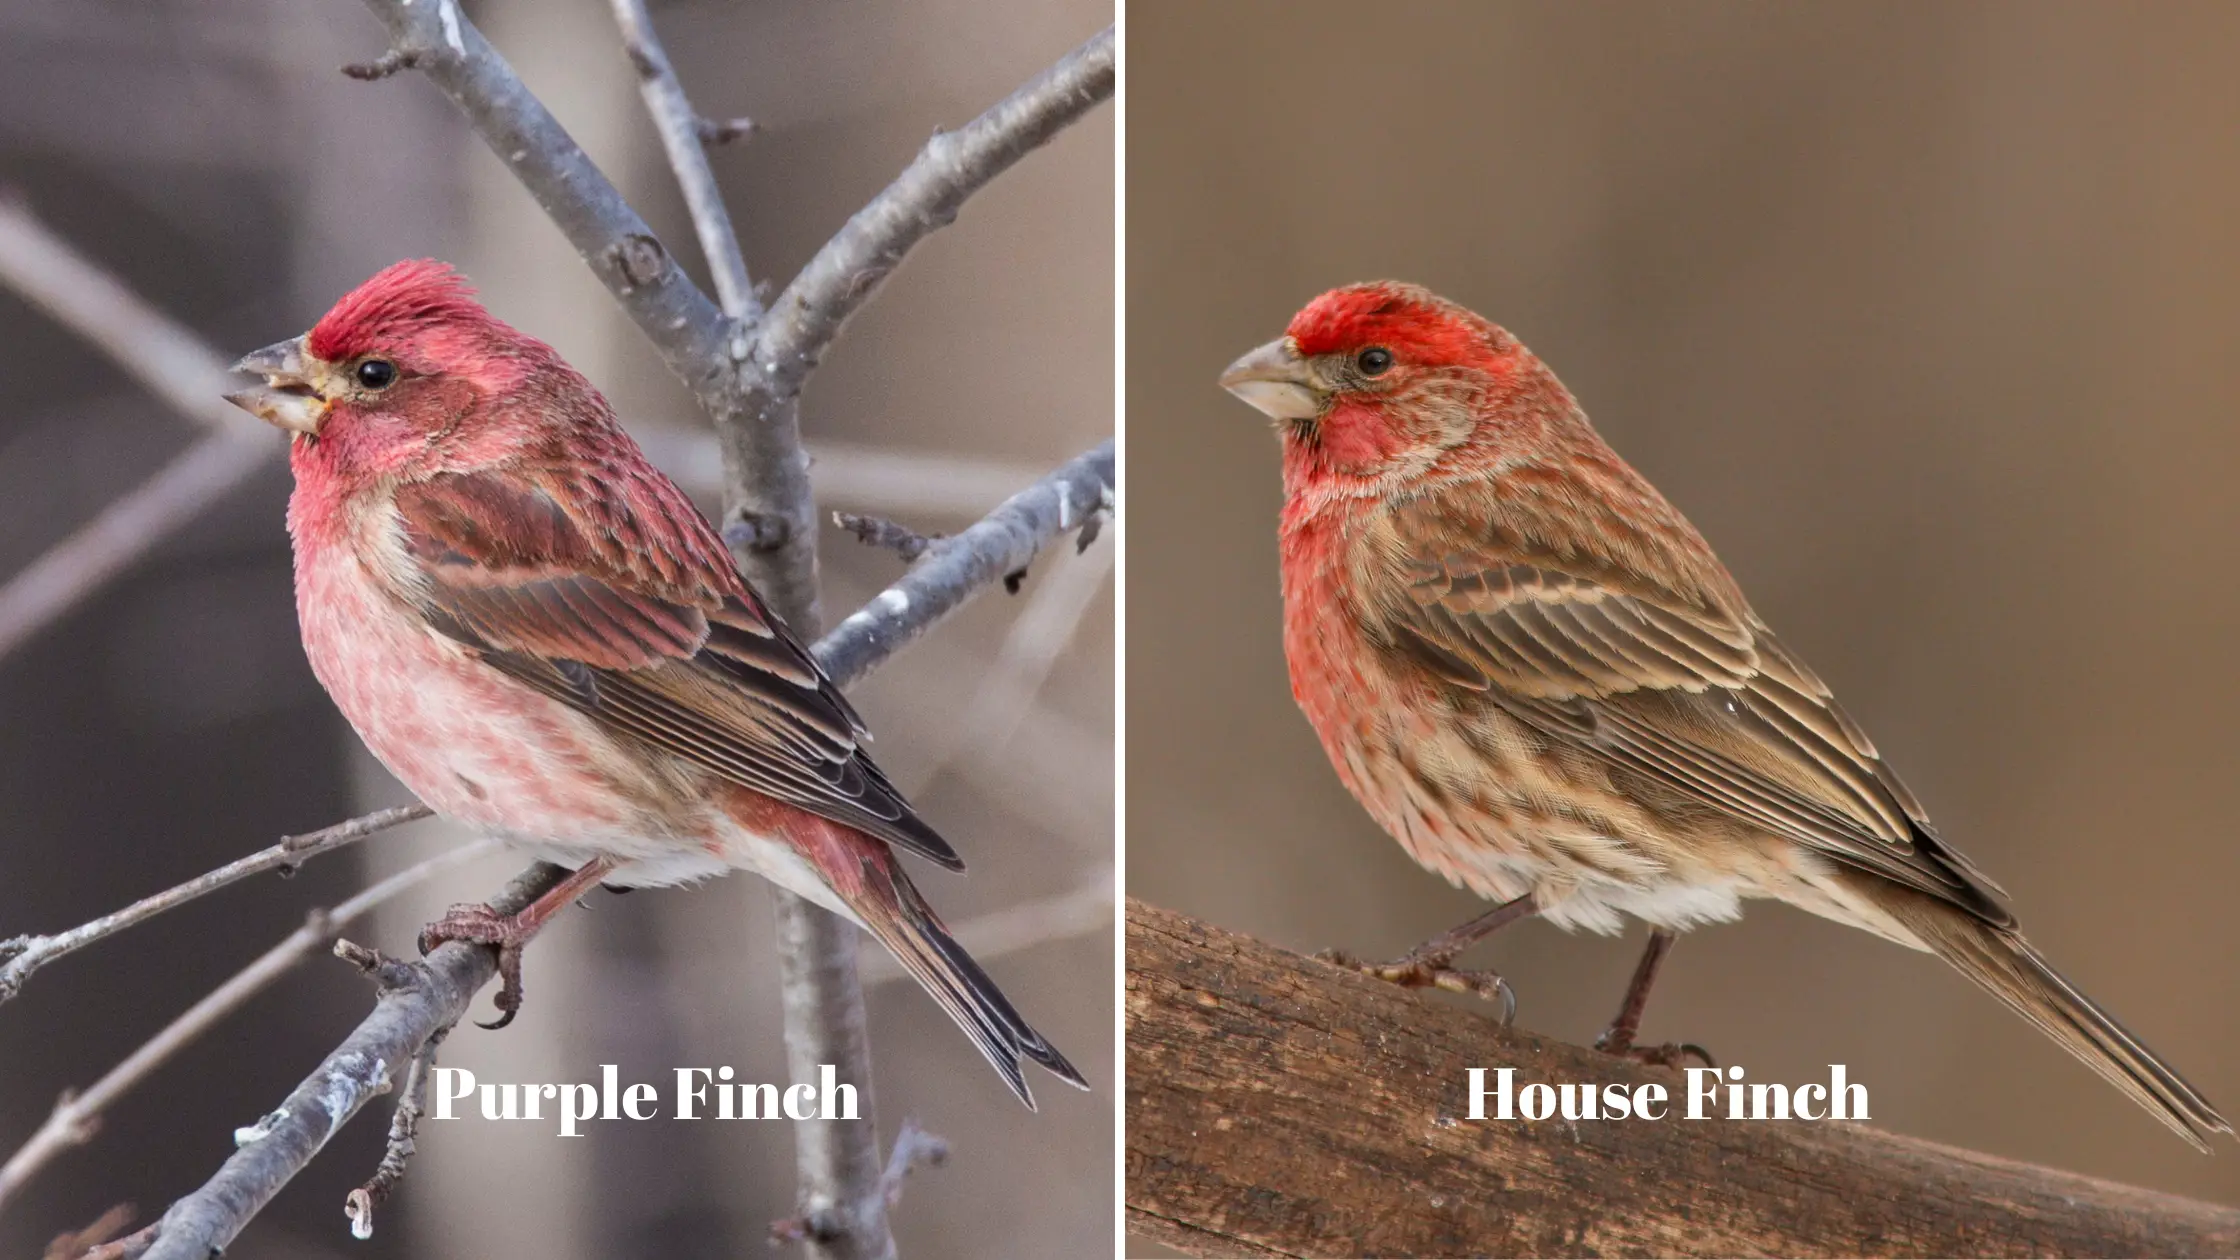 Purple Finch and House Finch